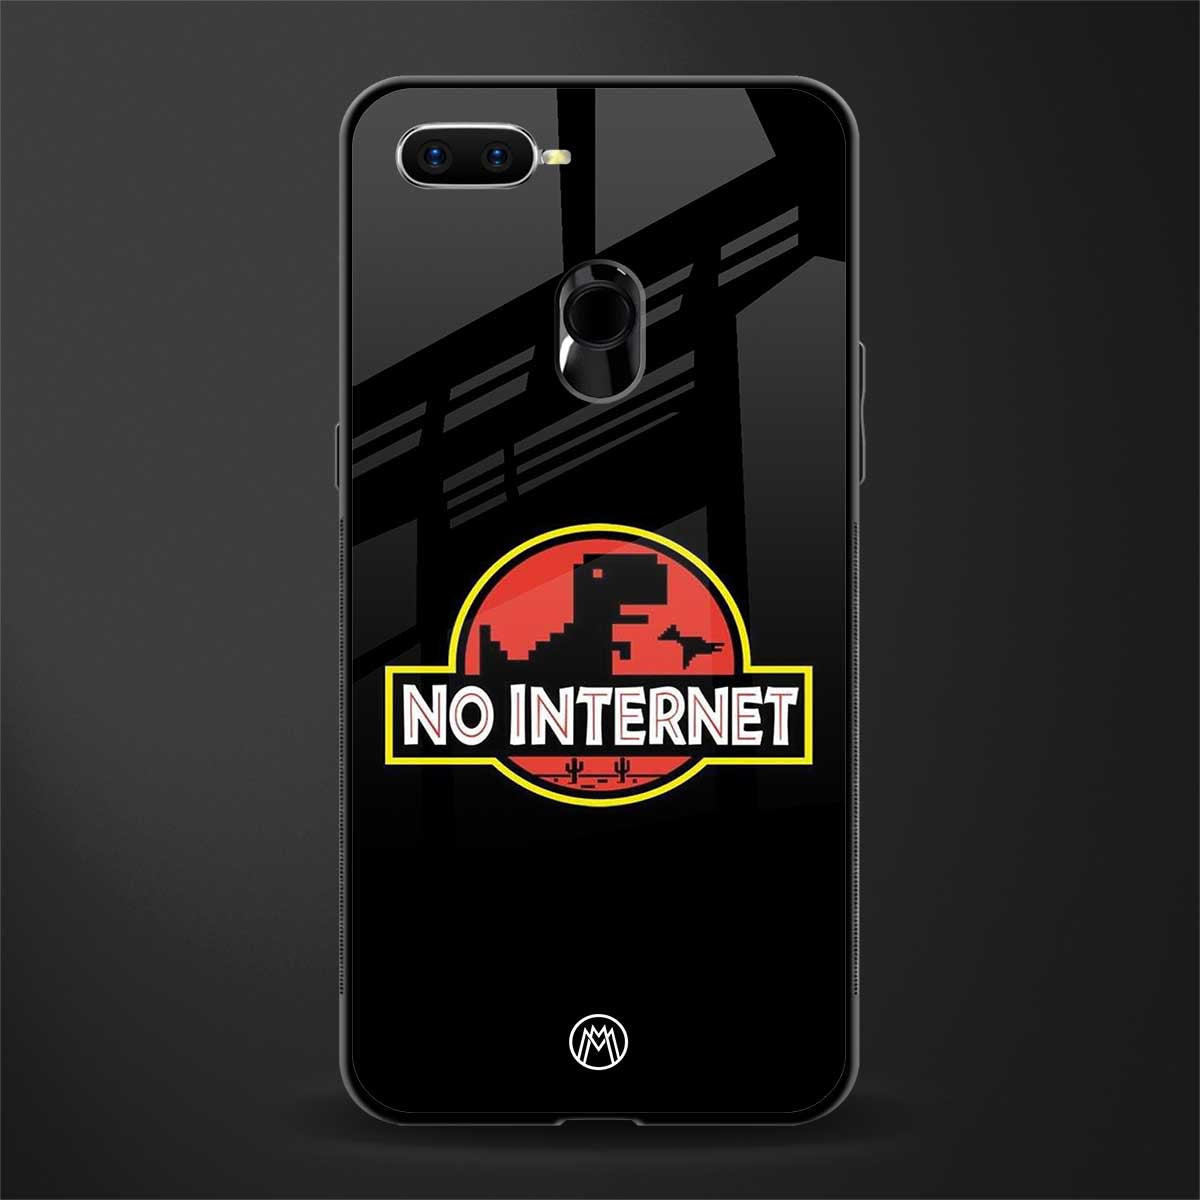 jurassic park no internet glass case for oppo a7 image